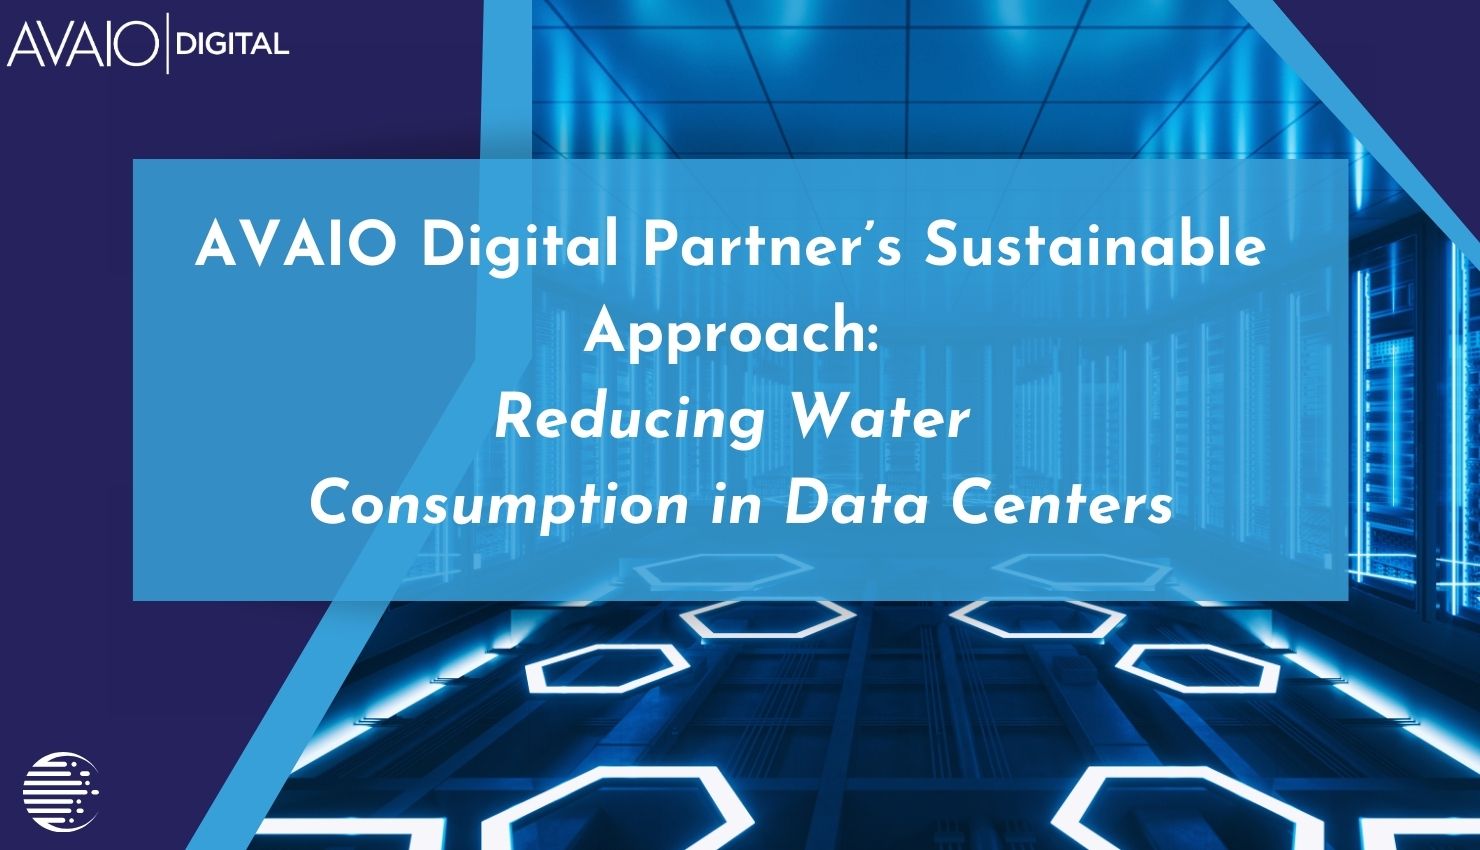 Featured image for “AVAIO Digital Partner’s Sustainable Approach: Reducing Water Consumption in Data Centers”